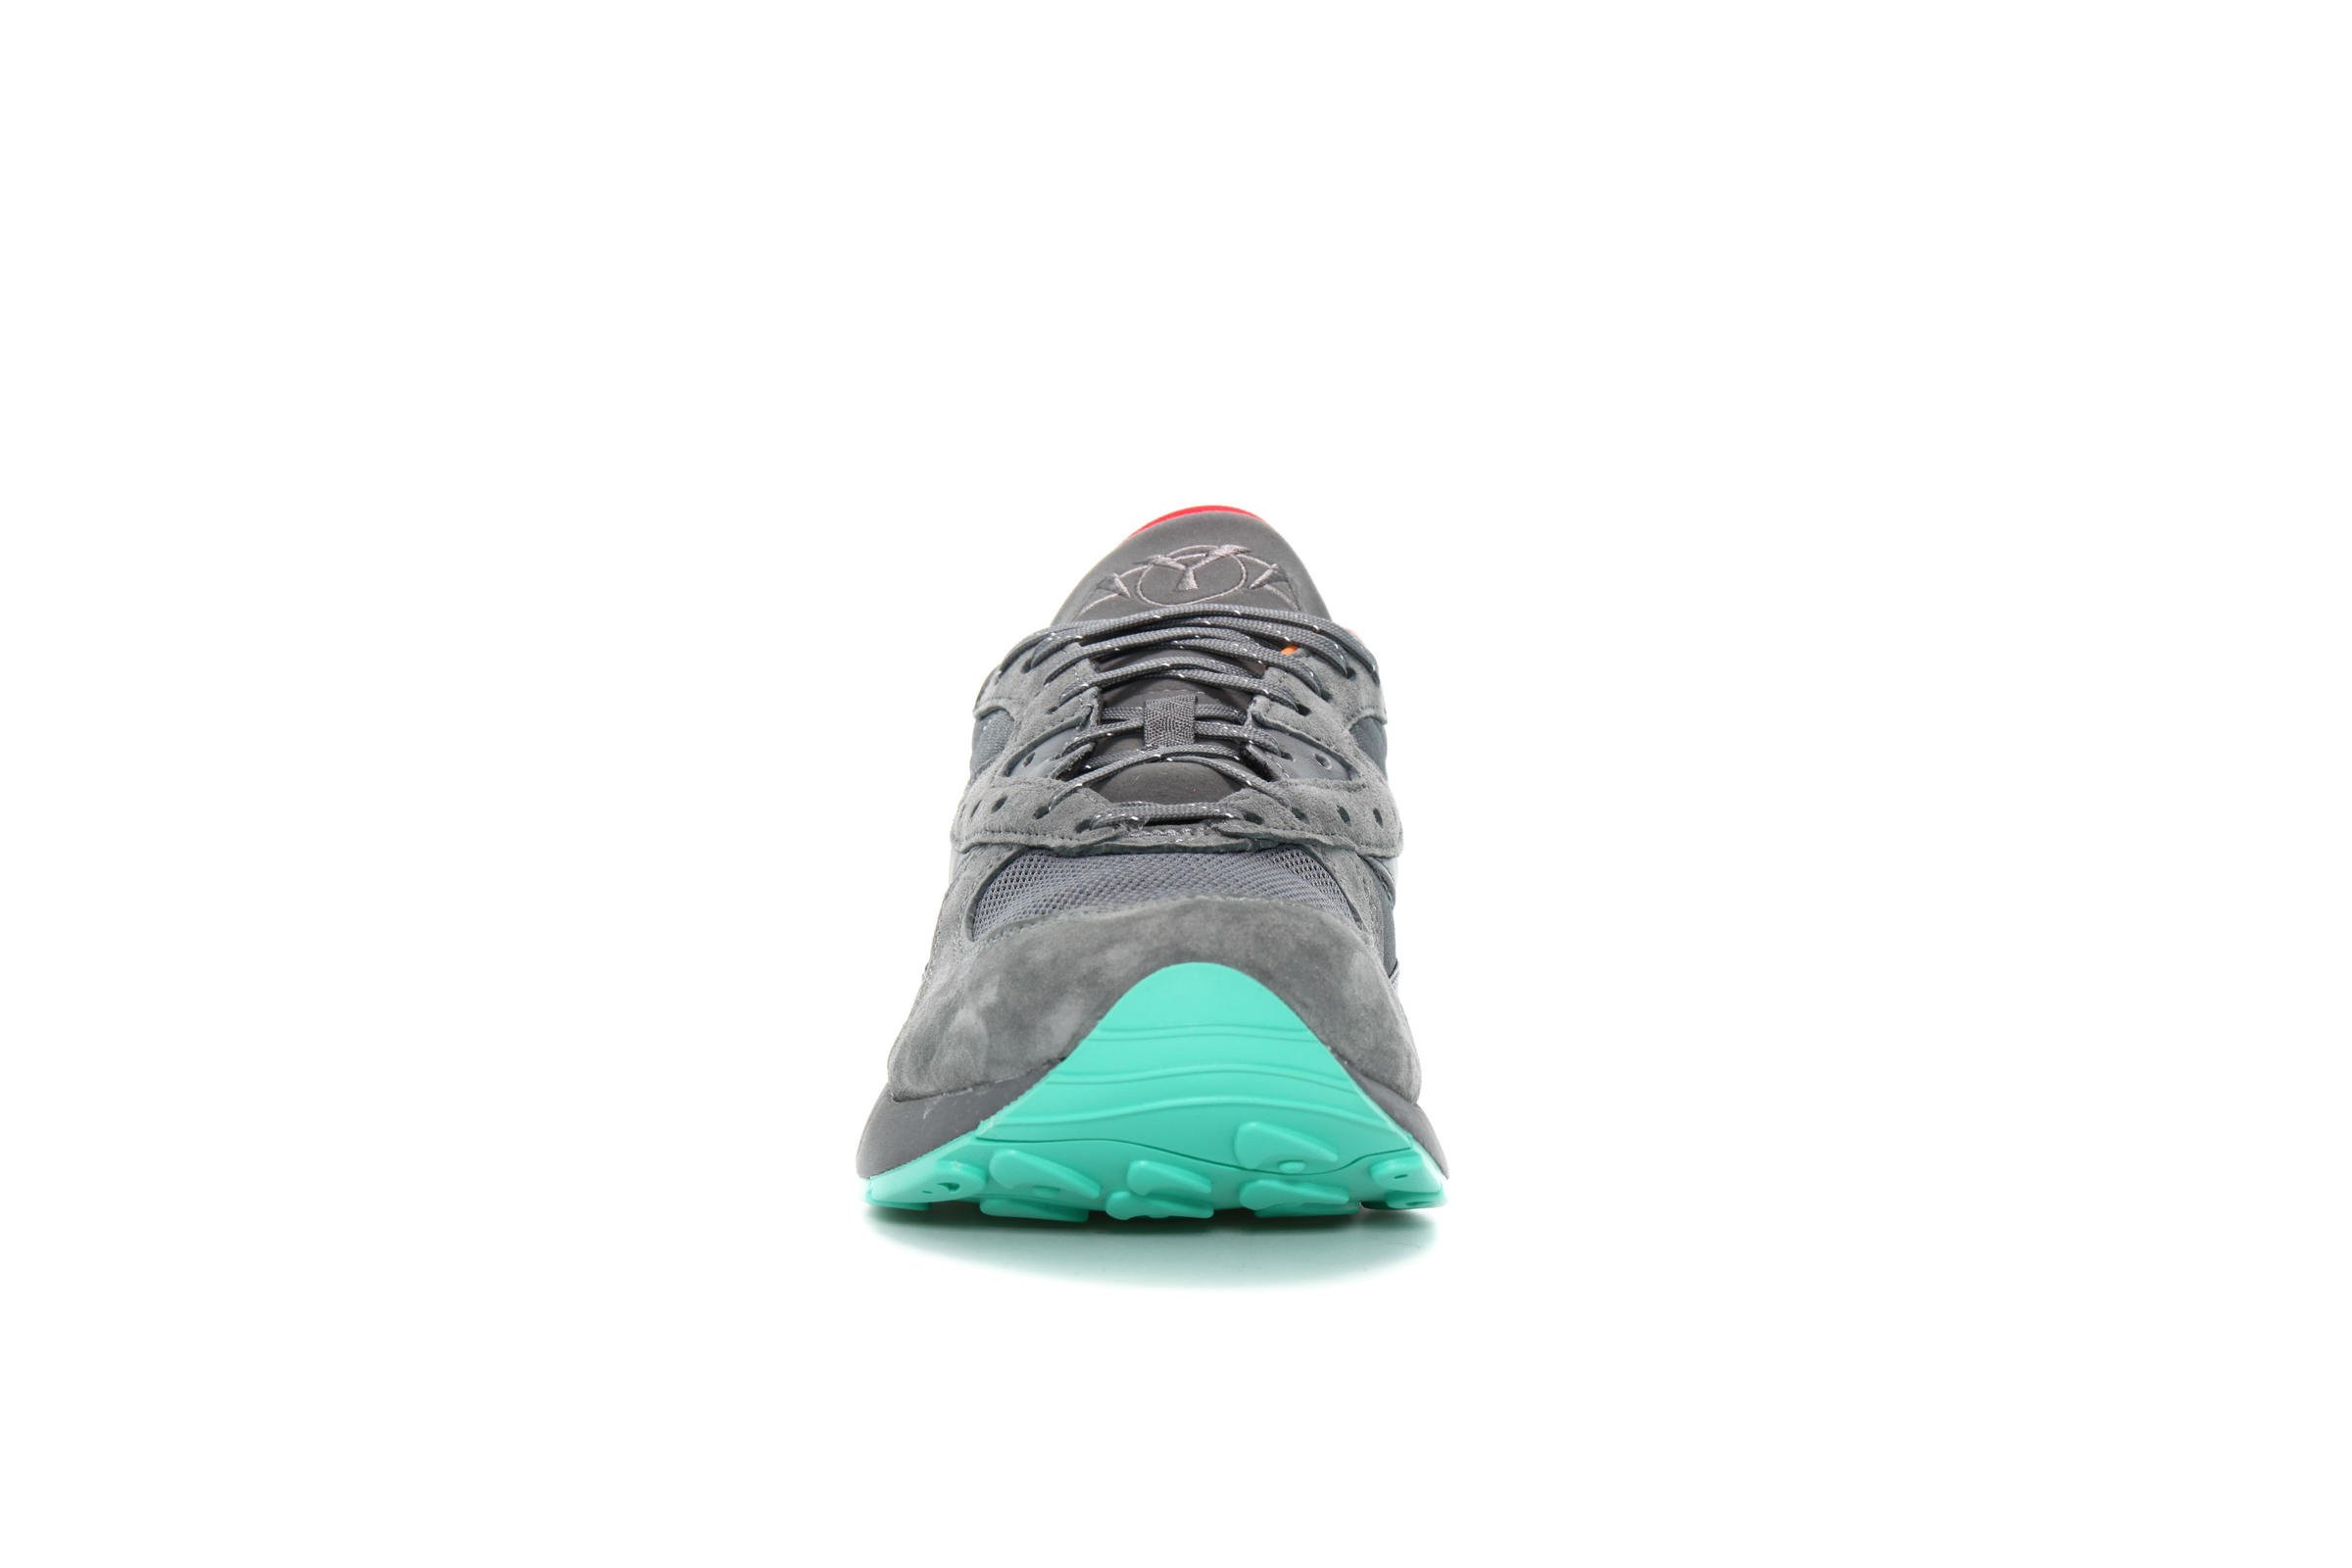 Saucony x Raised By Wolves AYA "GREY"